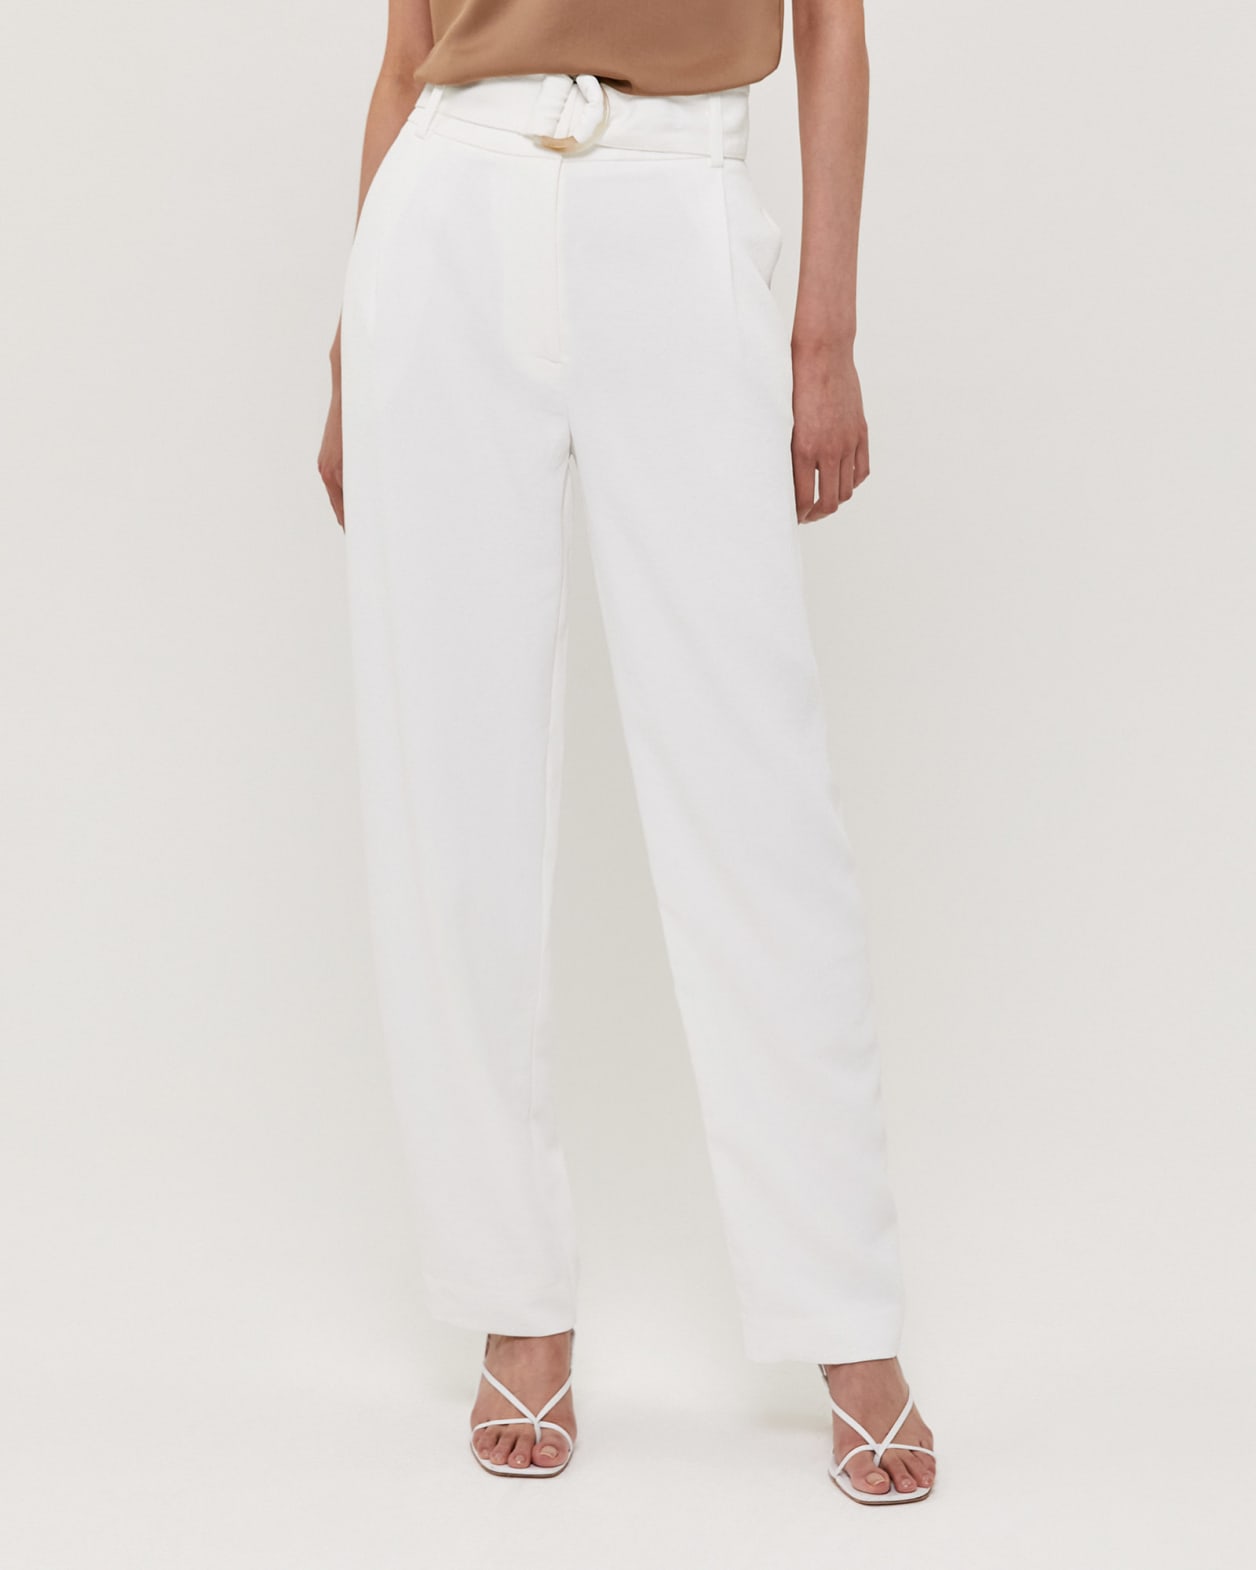 Dharma Belted Pant in ALABASTER